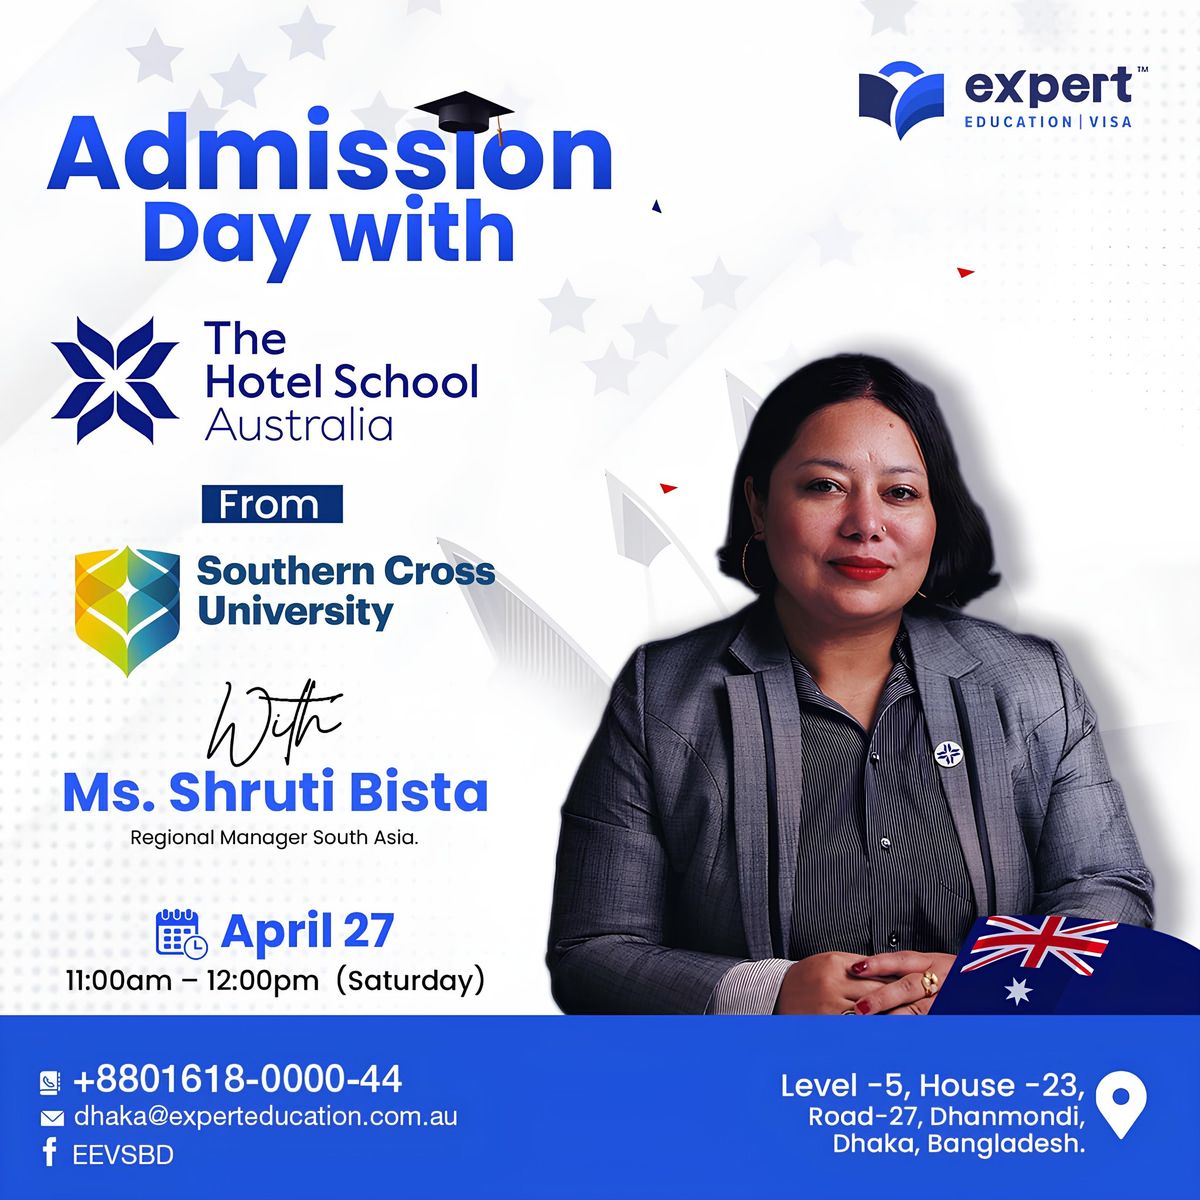 Admission Day with The Hotel School Australia by Southern Cross University